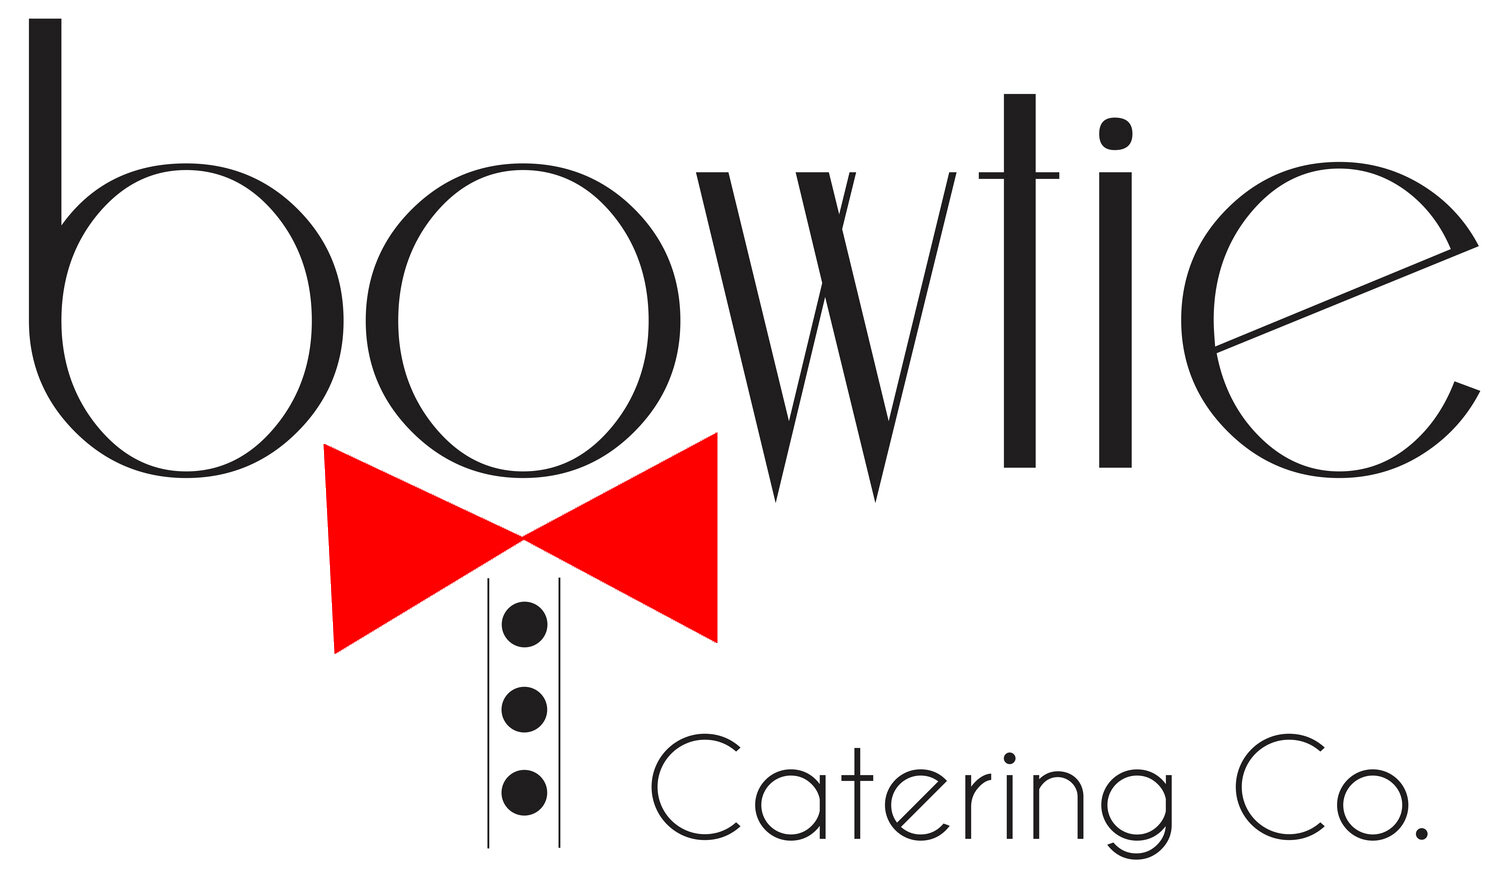 Bowtie Catering Company